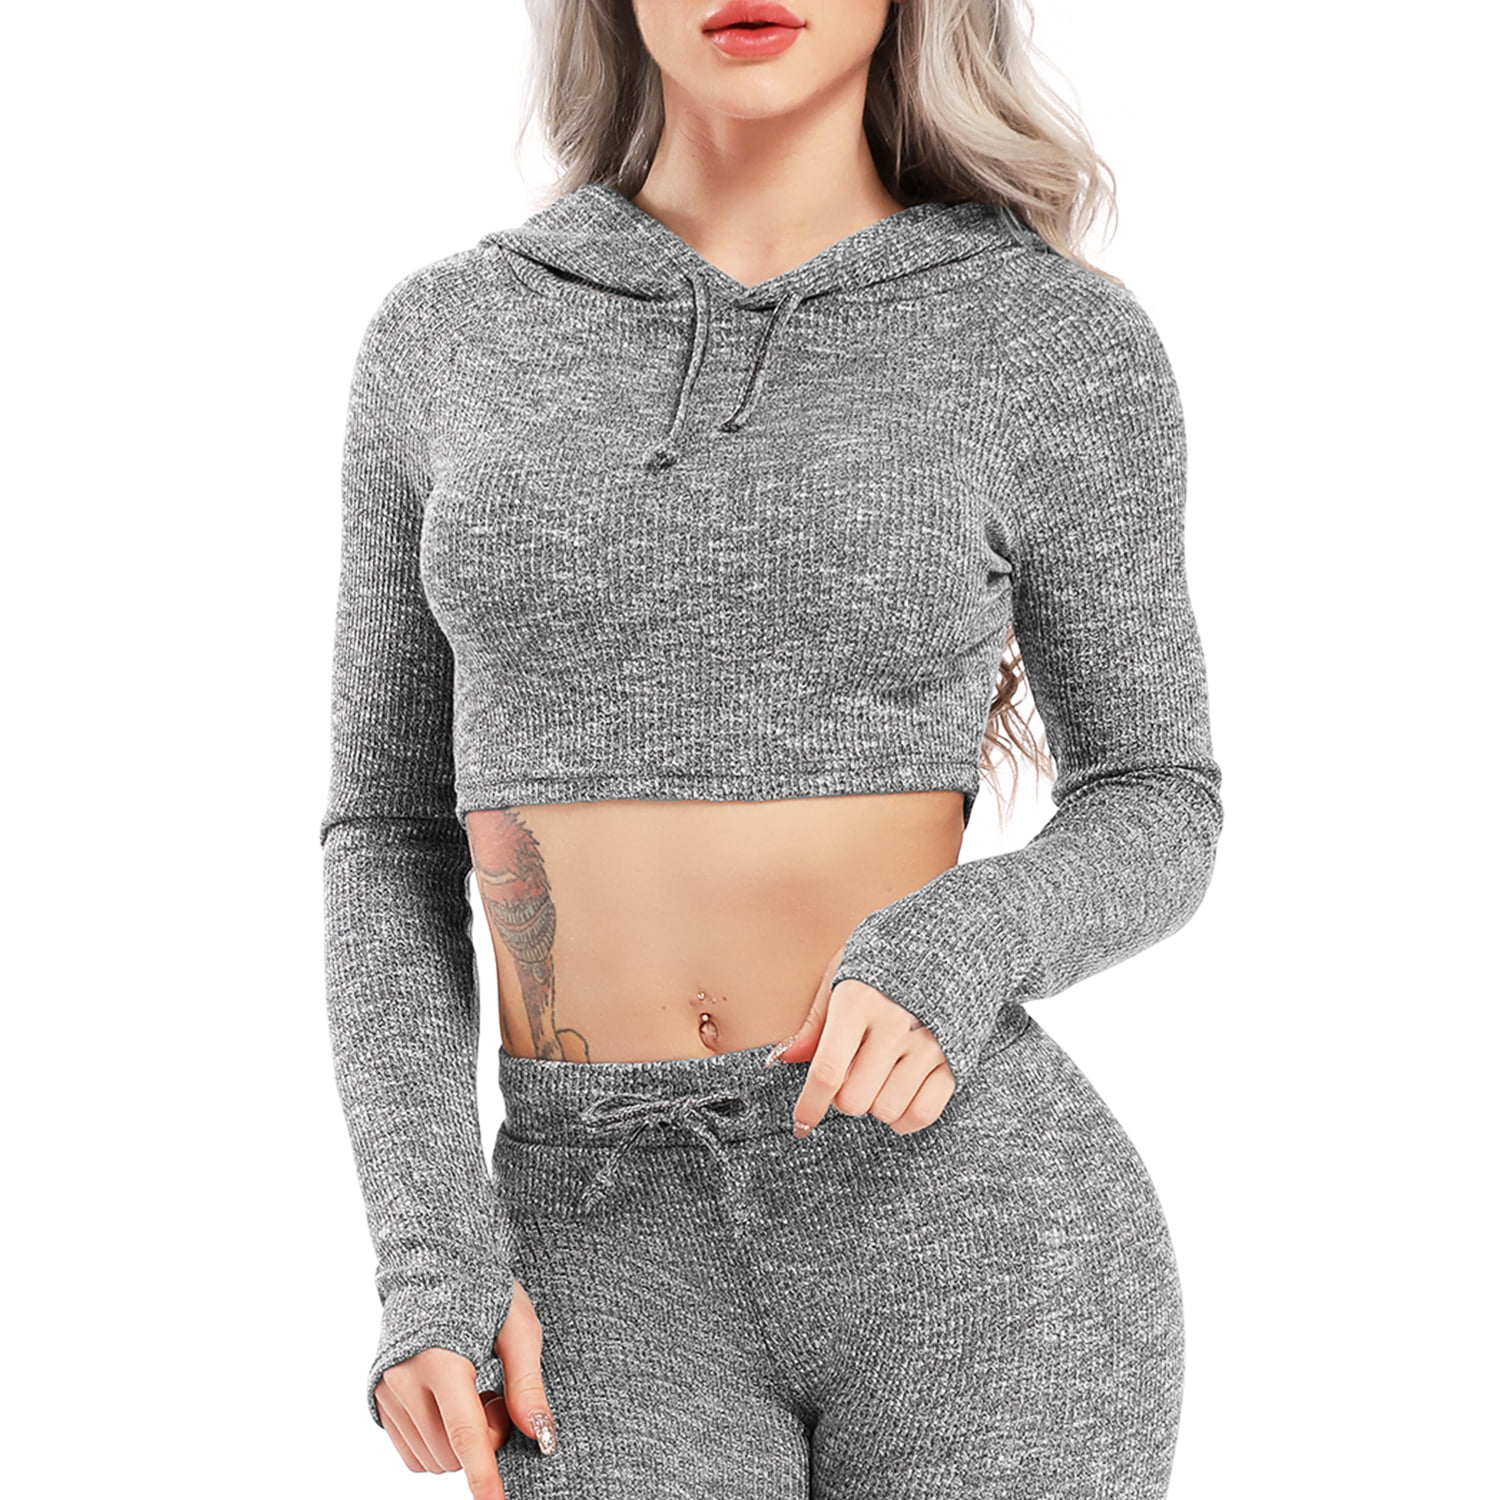 Asvivid Womens Two Piece Outfits Sets Solid Ribbed Zipper Crop Tops Hoodie Sweatsuits Sport Workout Fitness Active Tracksuits 